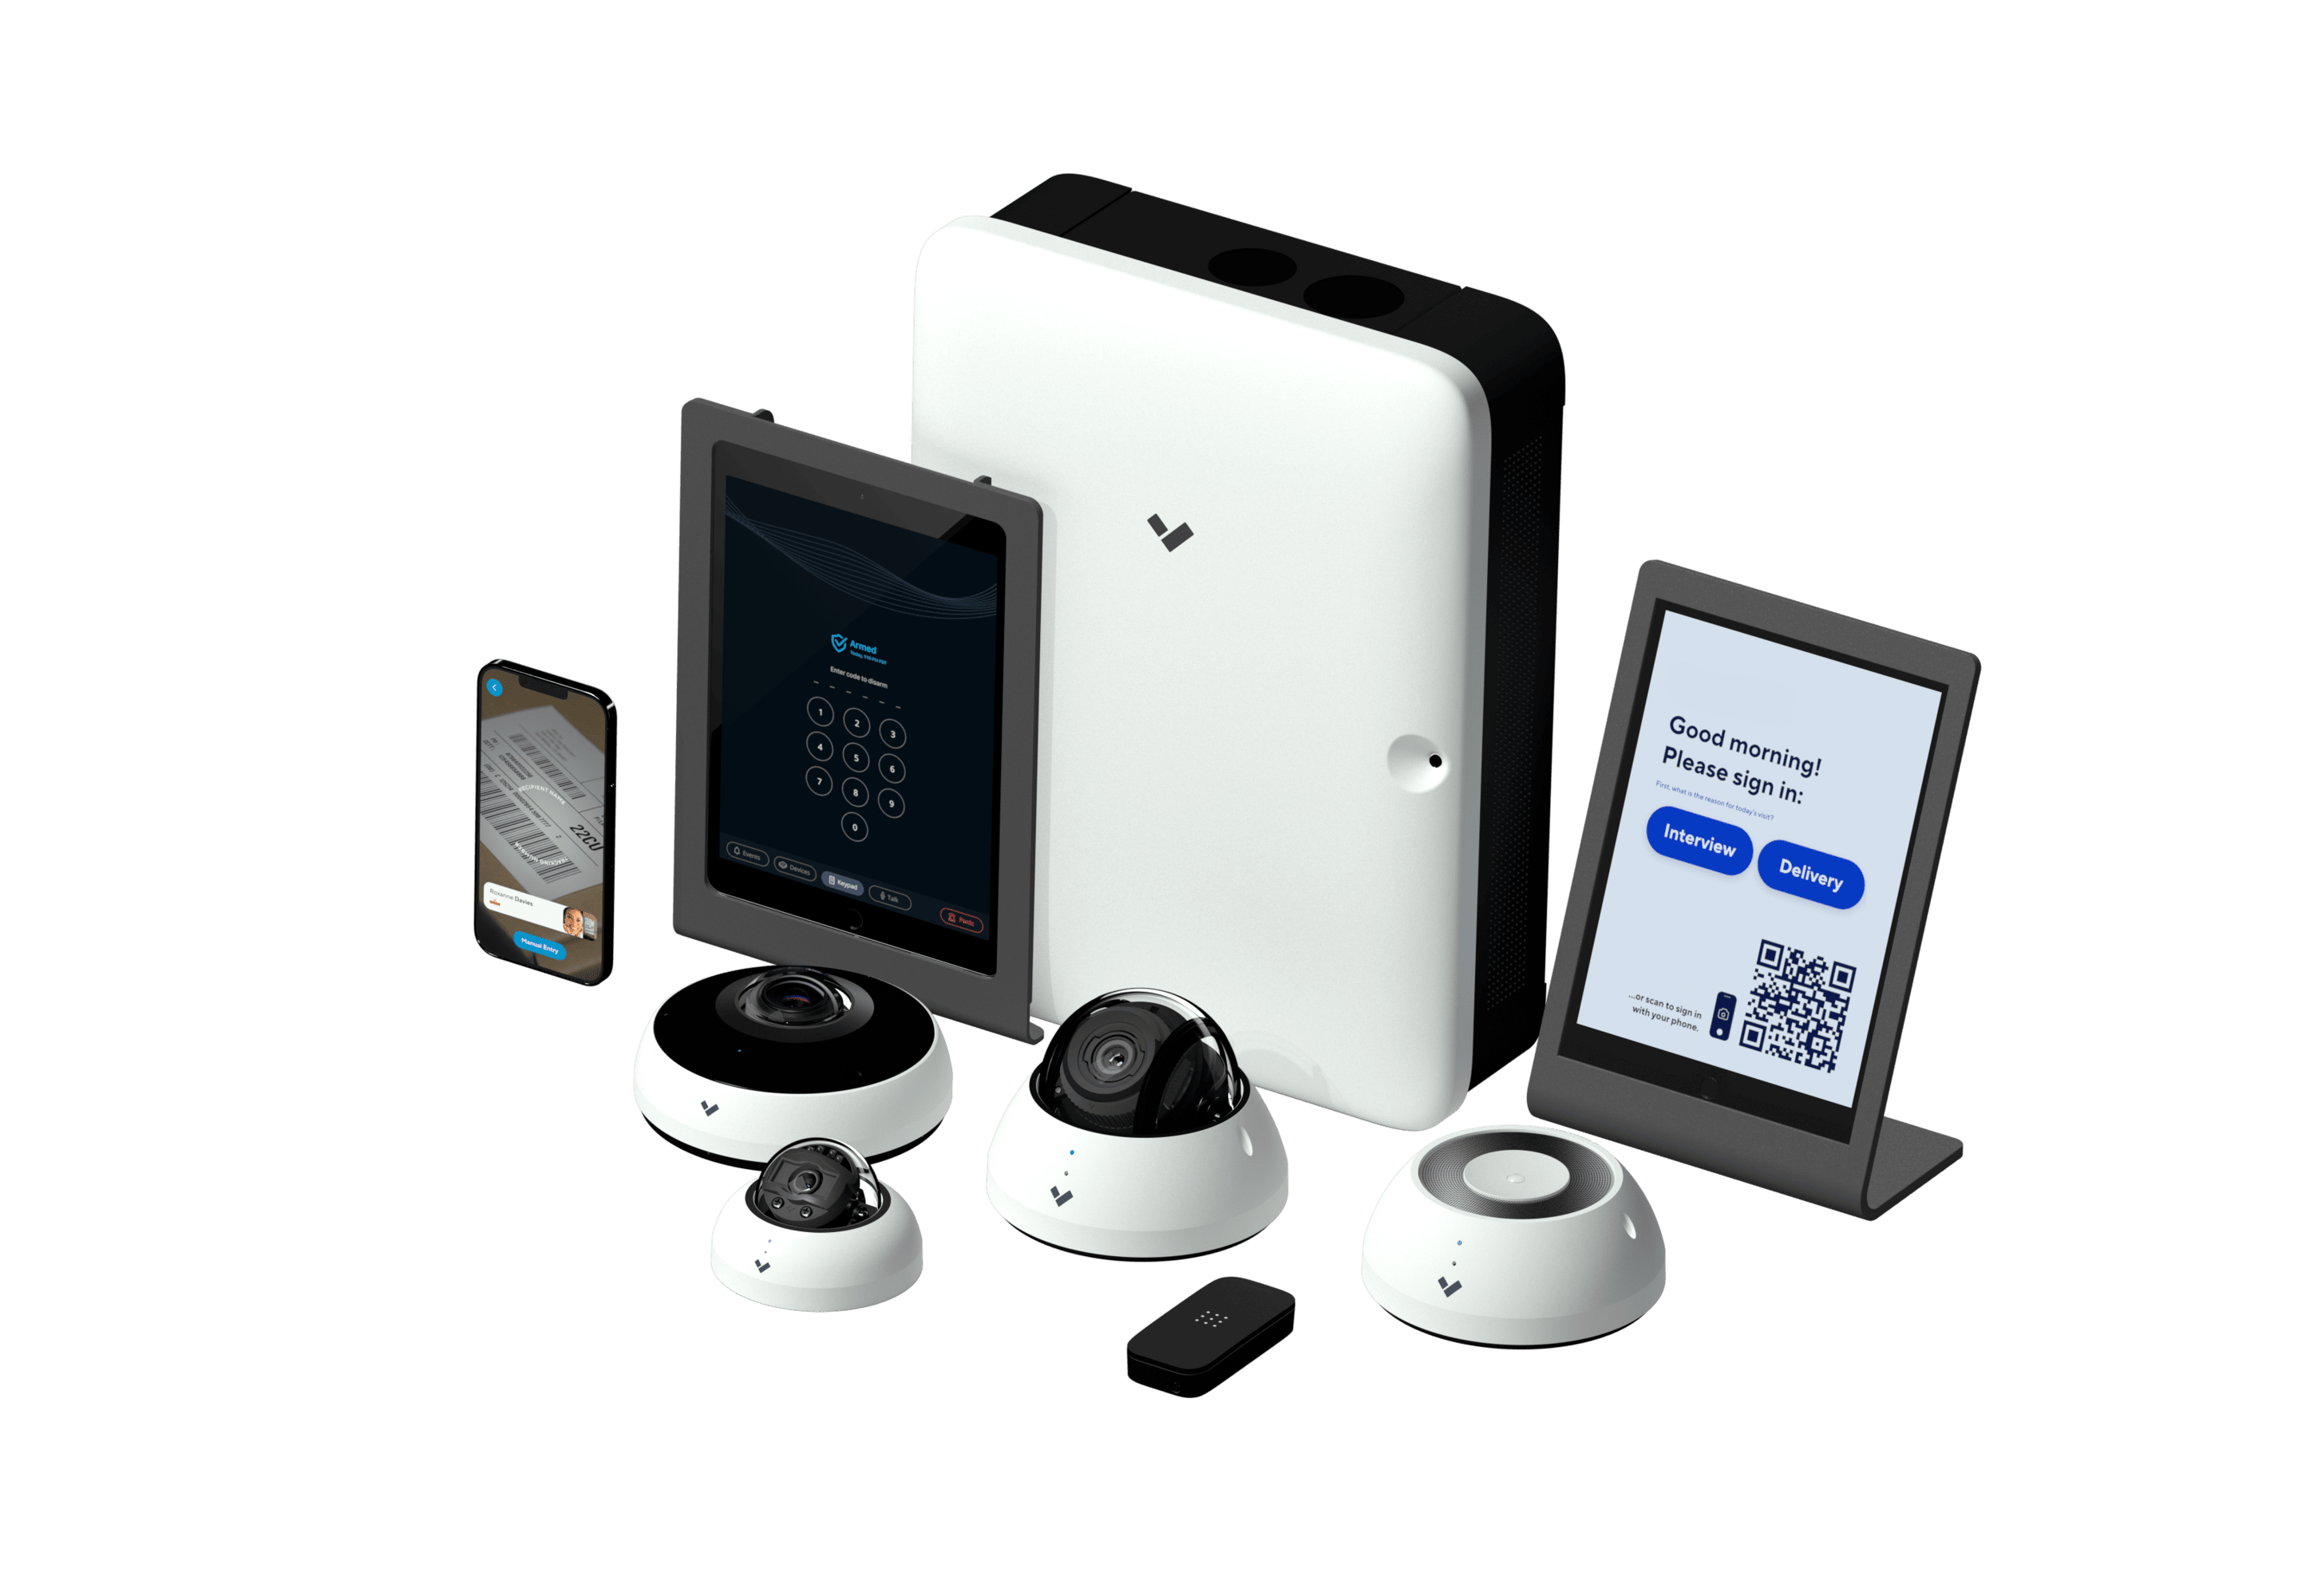 Verkada Device Family enhances loss prevention efforts with cloud based access control